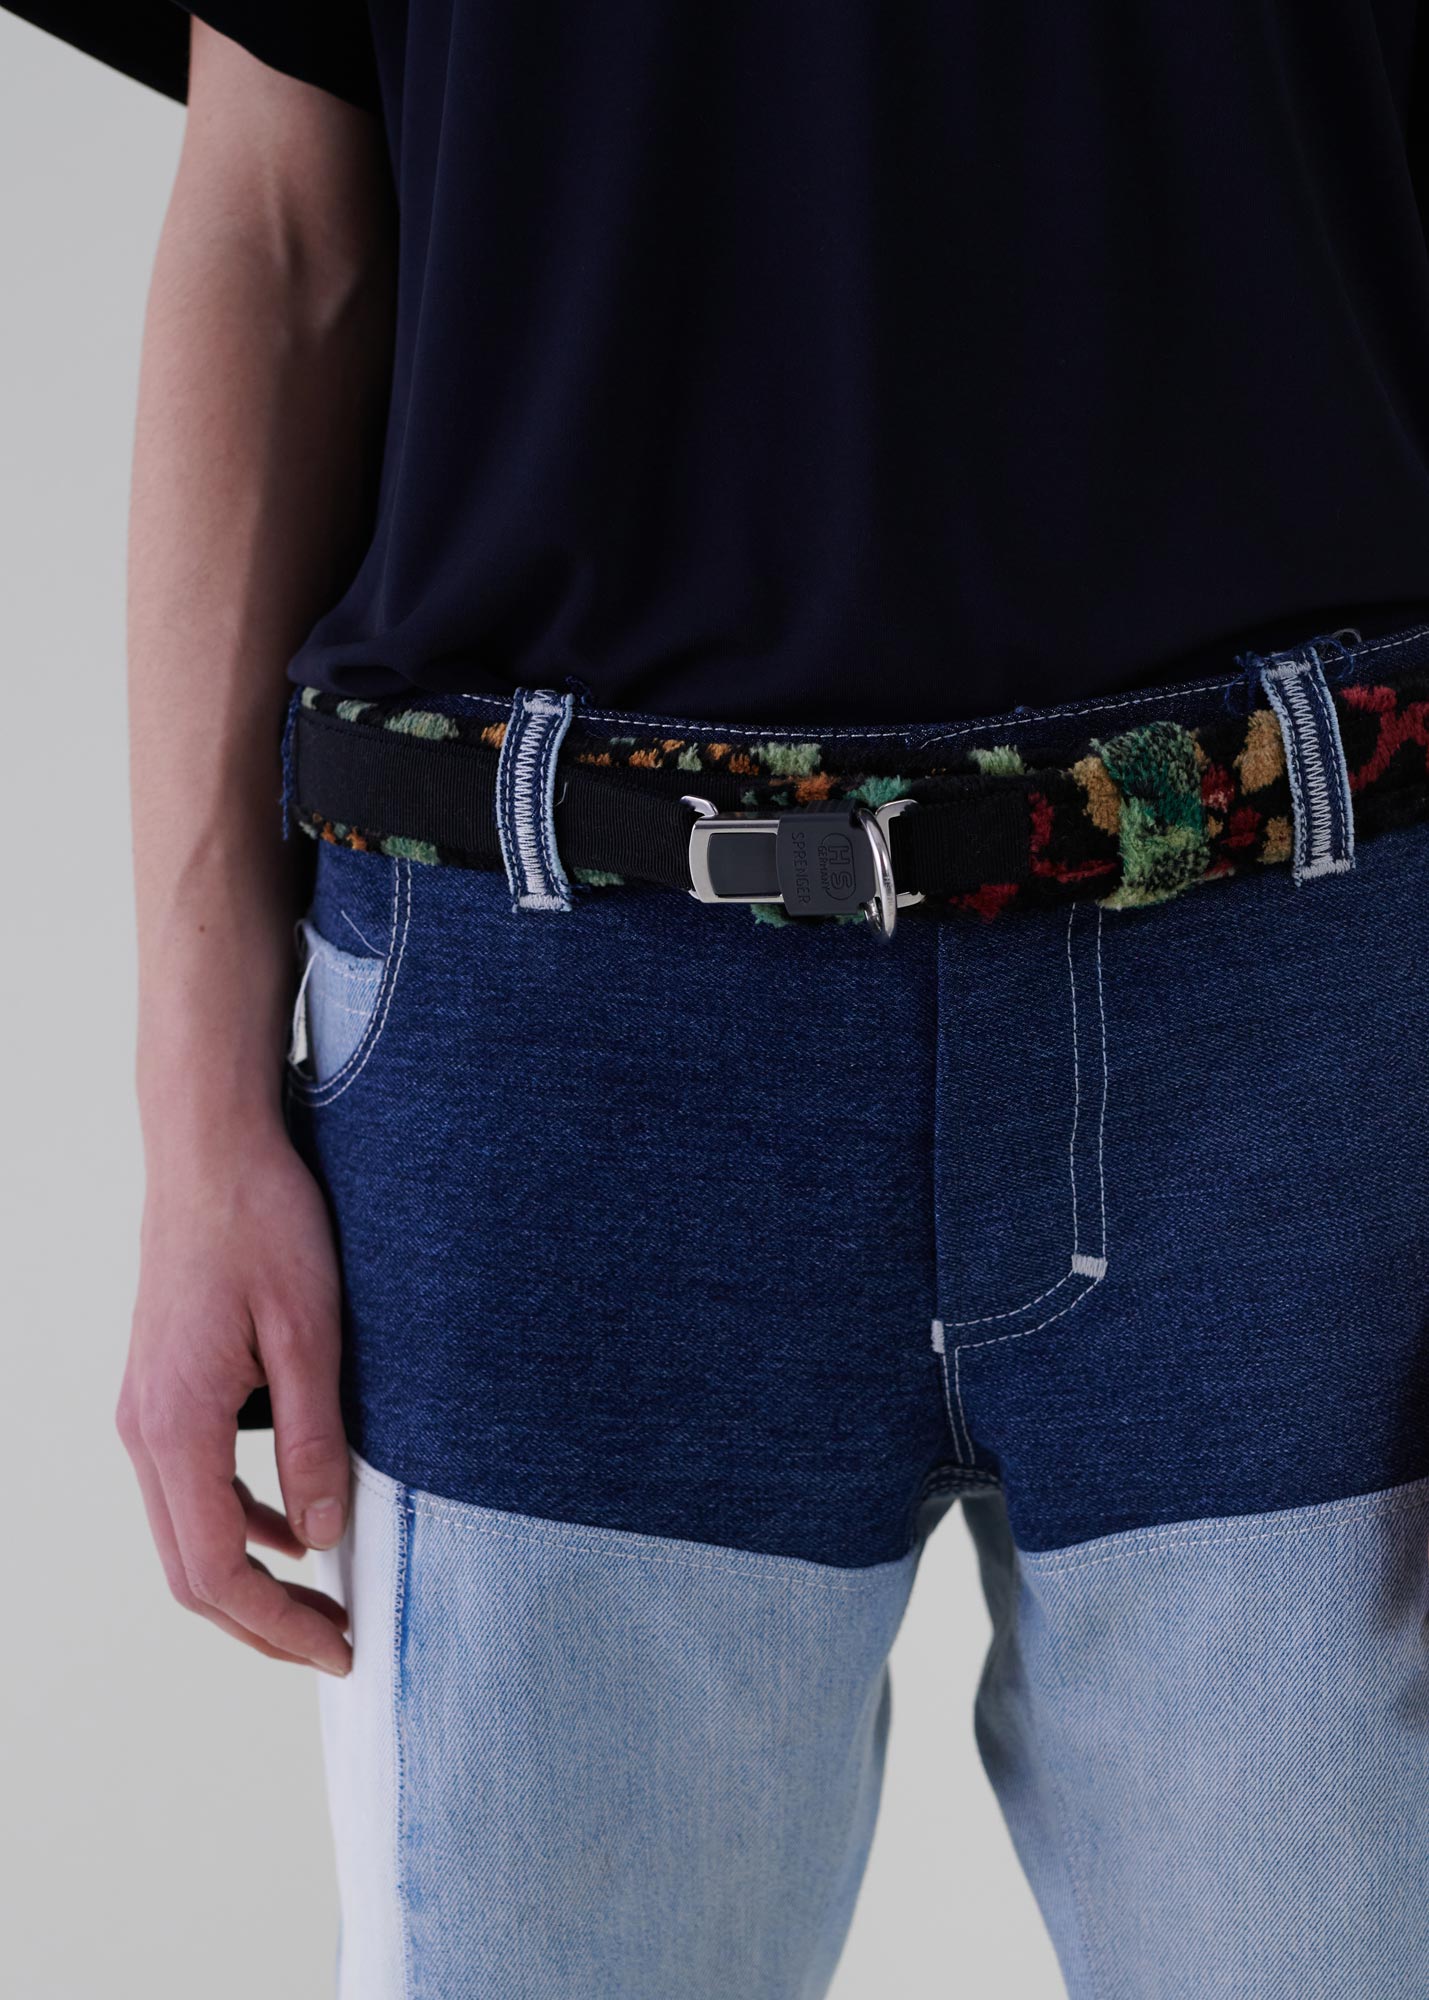 Sustainable fashion with upcycled tapestry belt from Aldwin Teva William